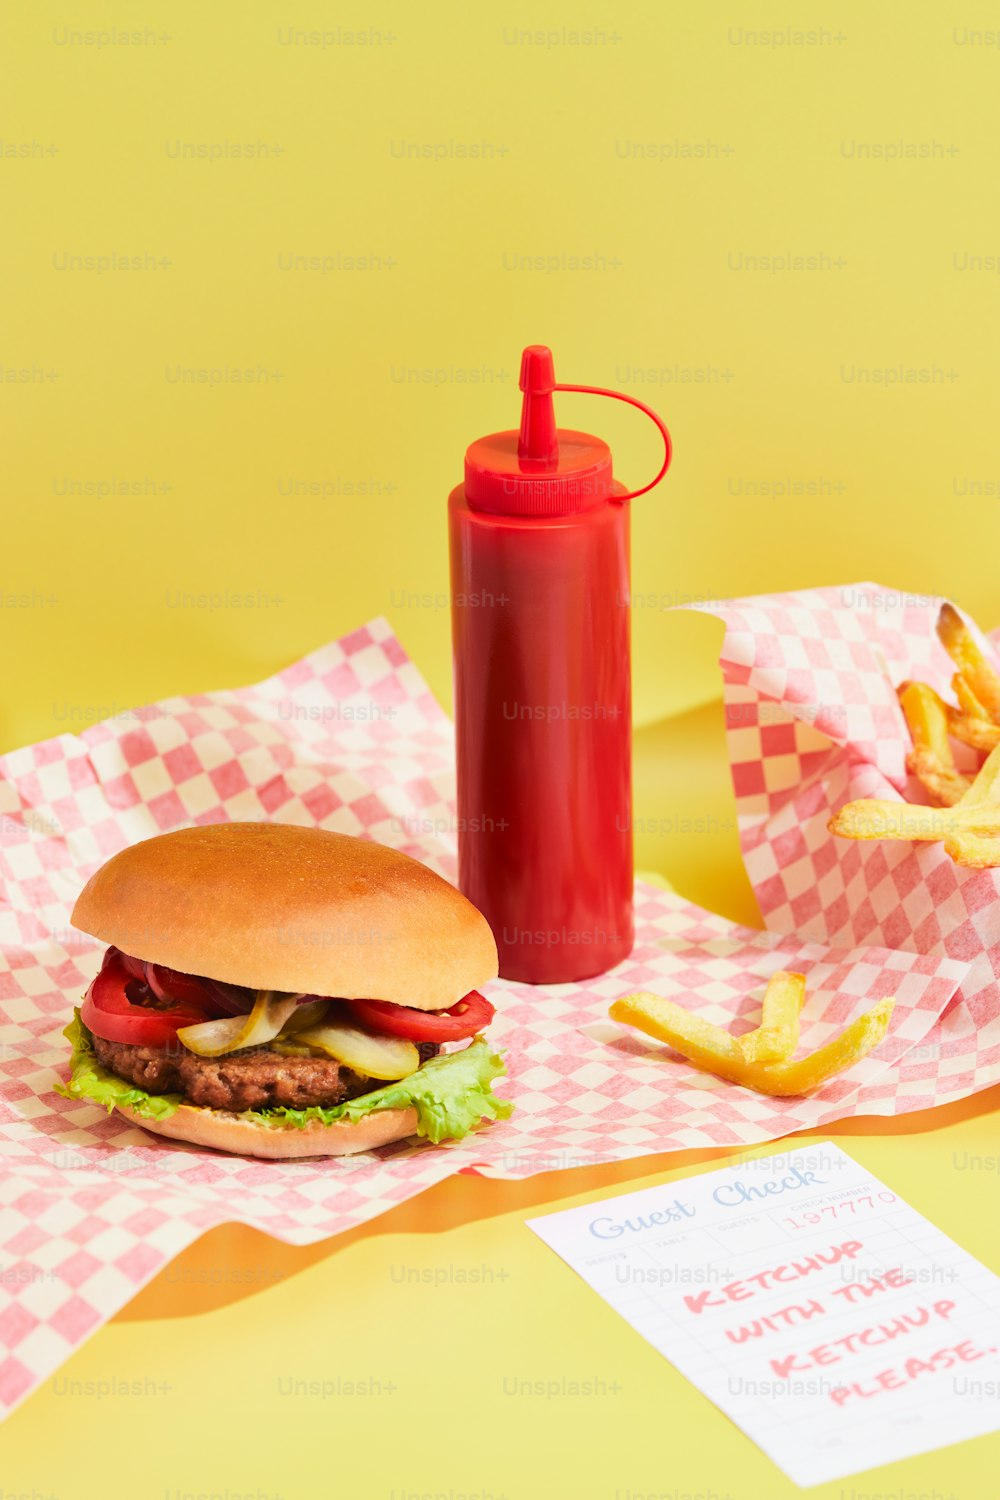 a hamburger and french fries on a yellow background